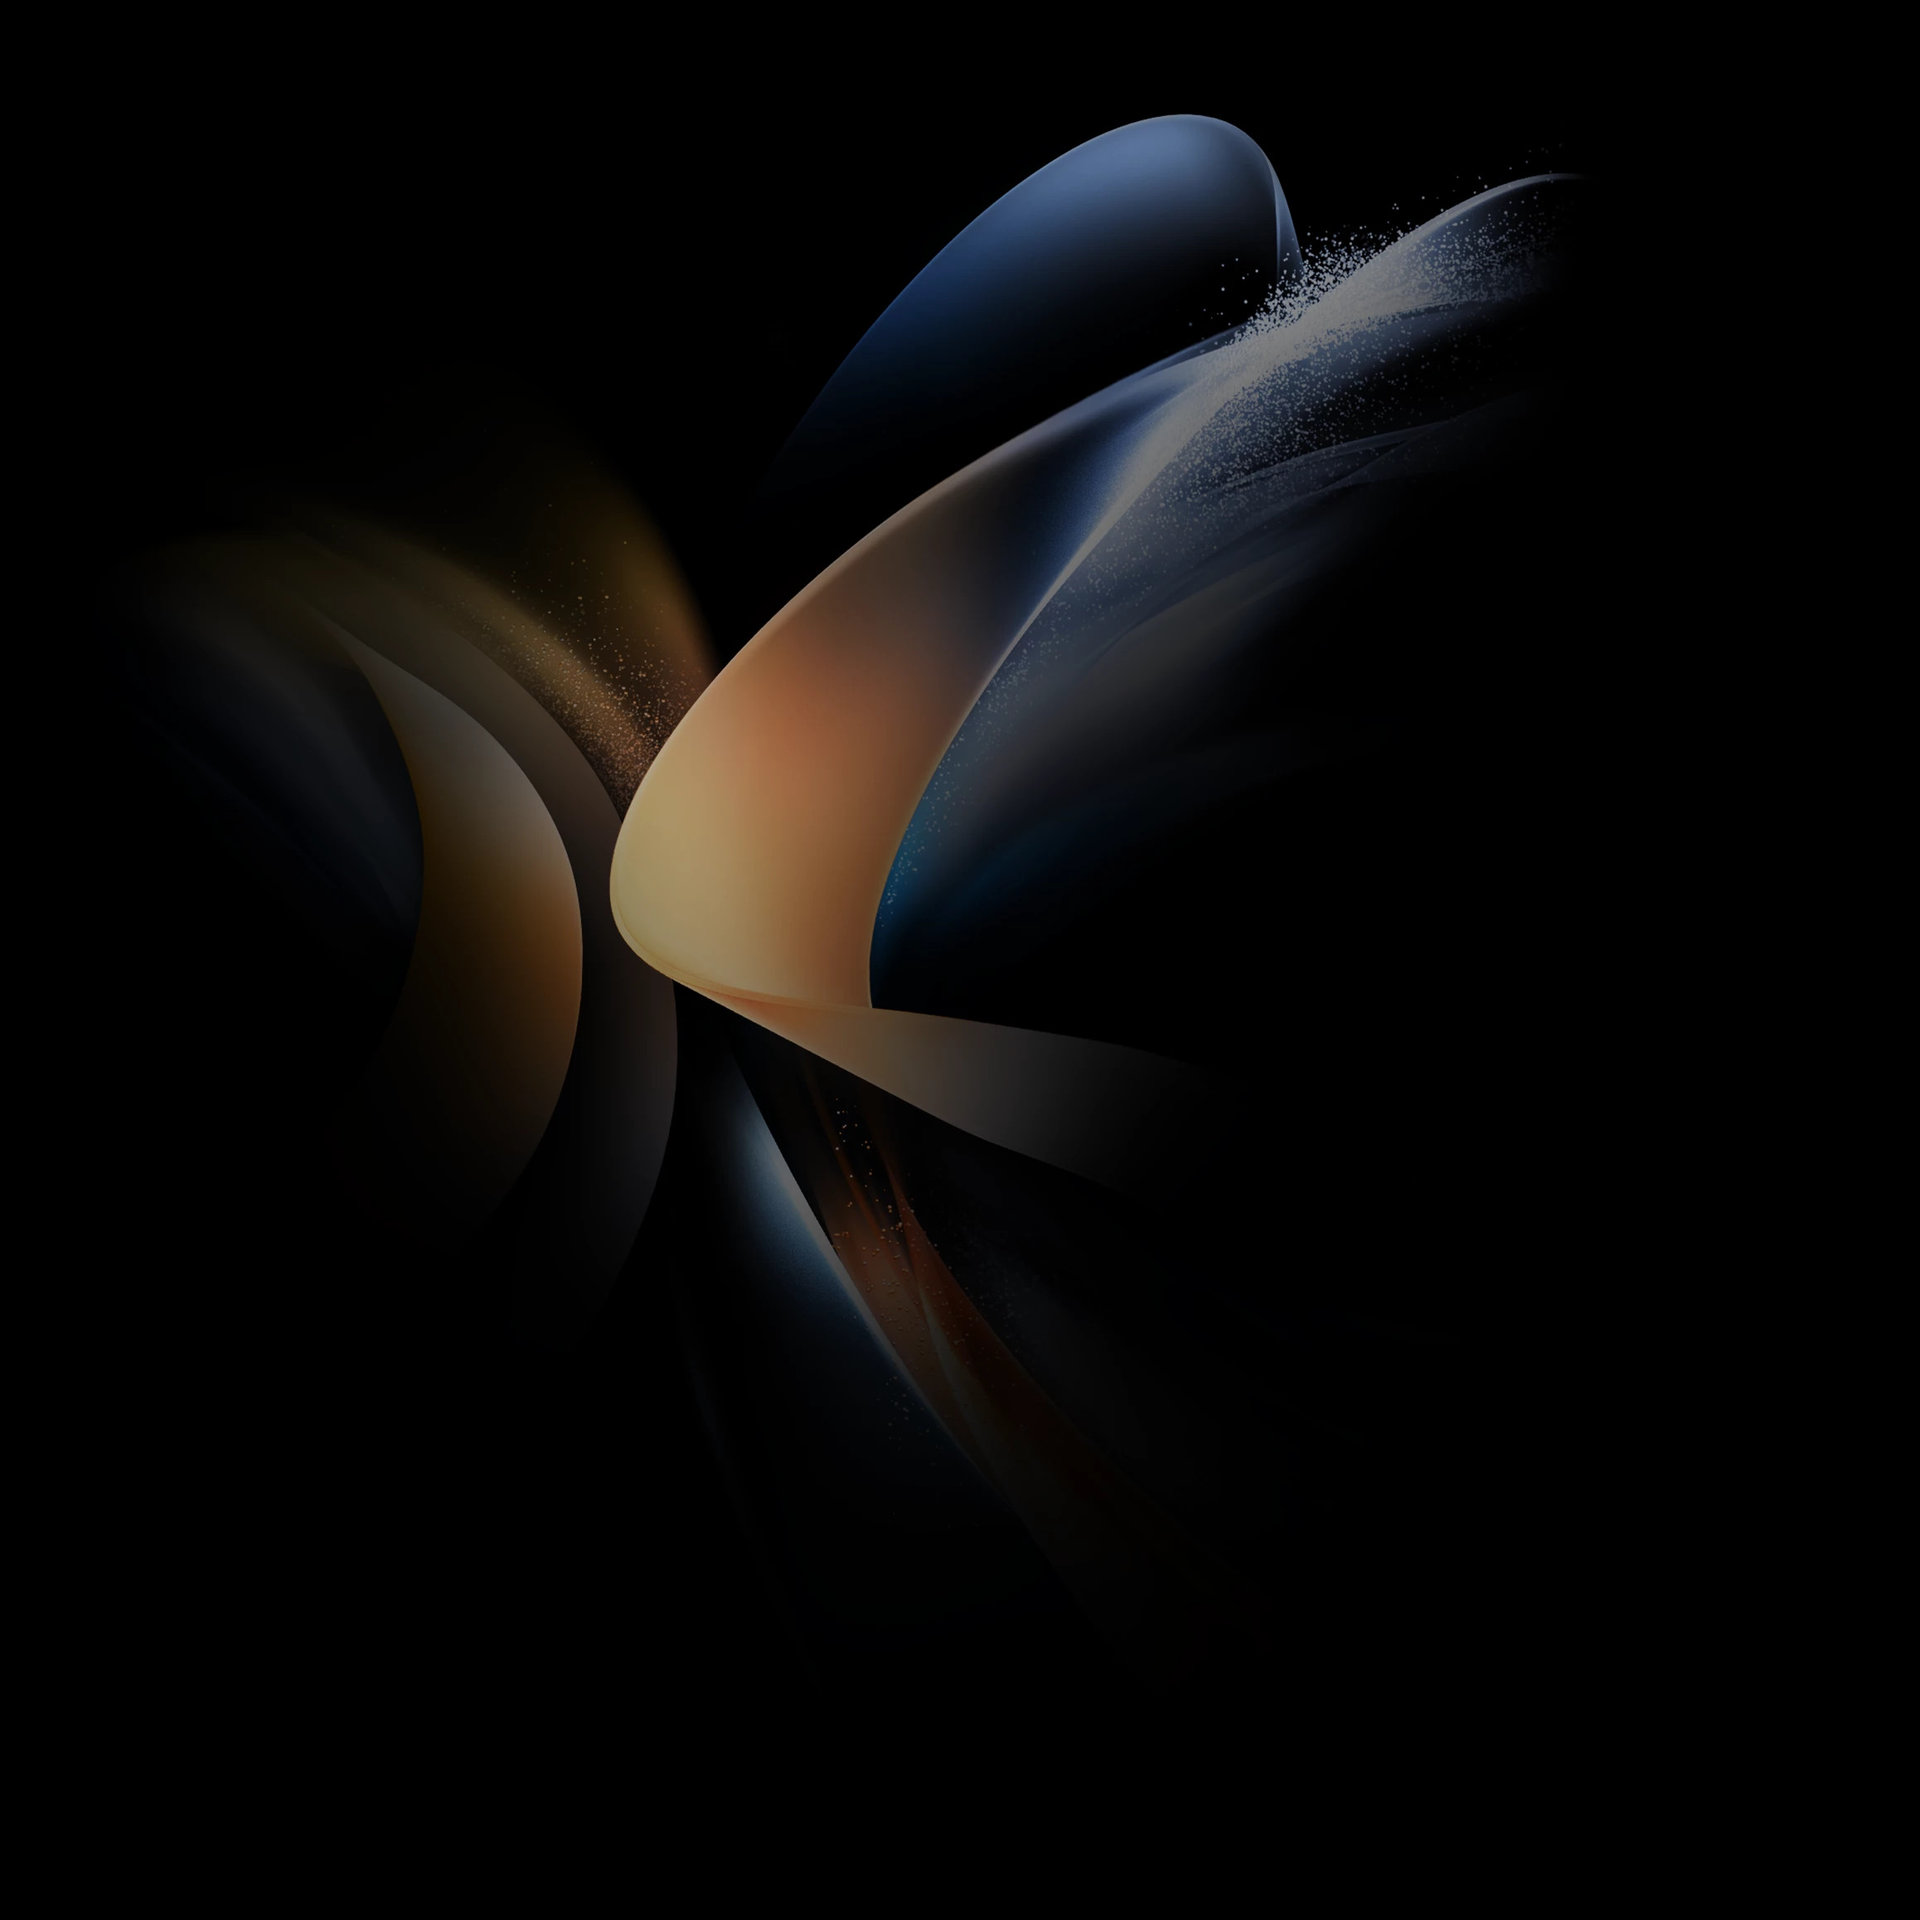 Galaxy S20 Ultra Stock Wallpapers